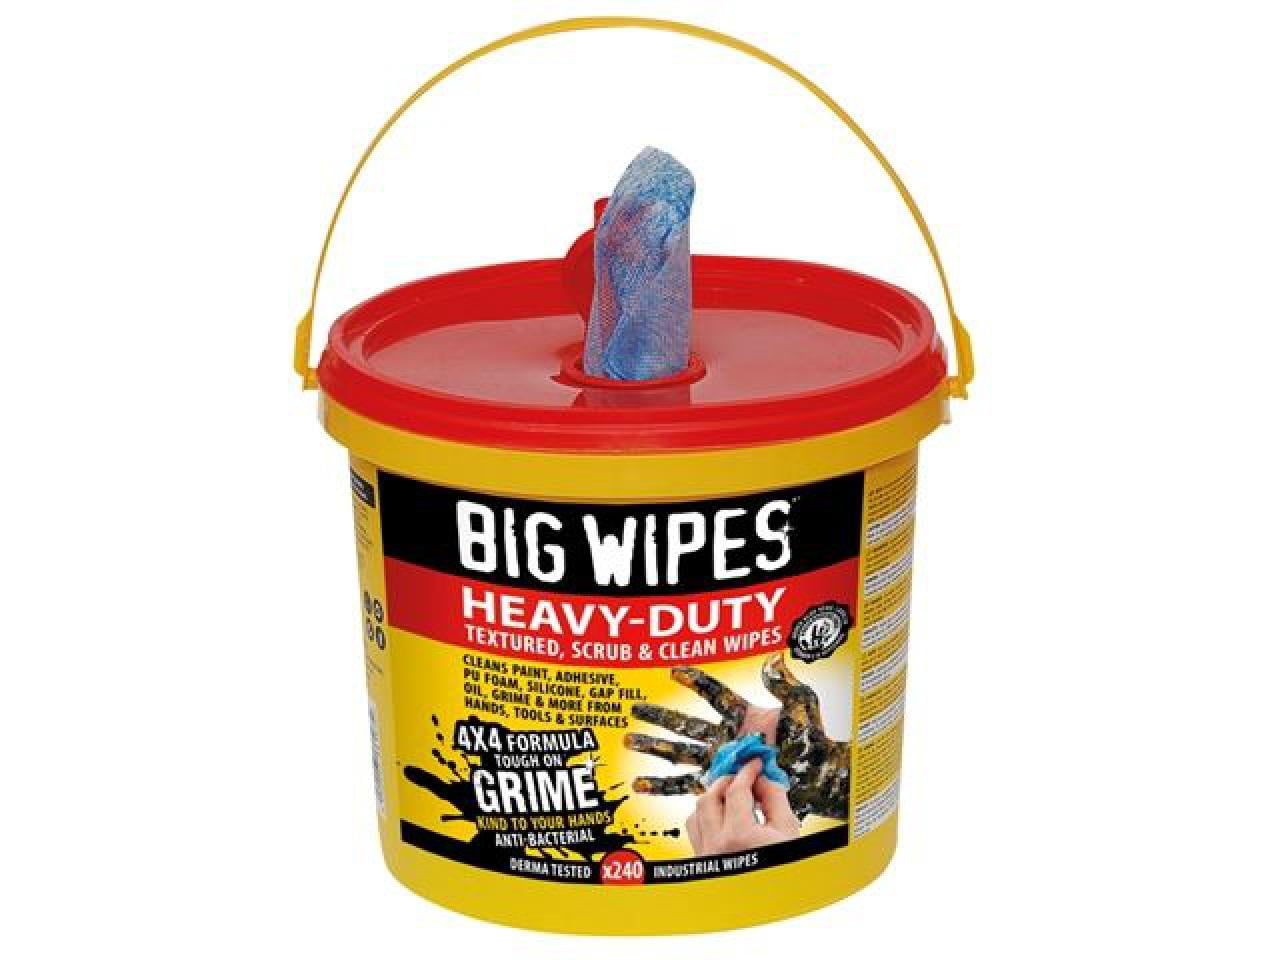 Big Wipes Heavy Duty Antibacterial Textured Cleaning Wipes 80pk